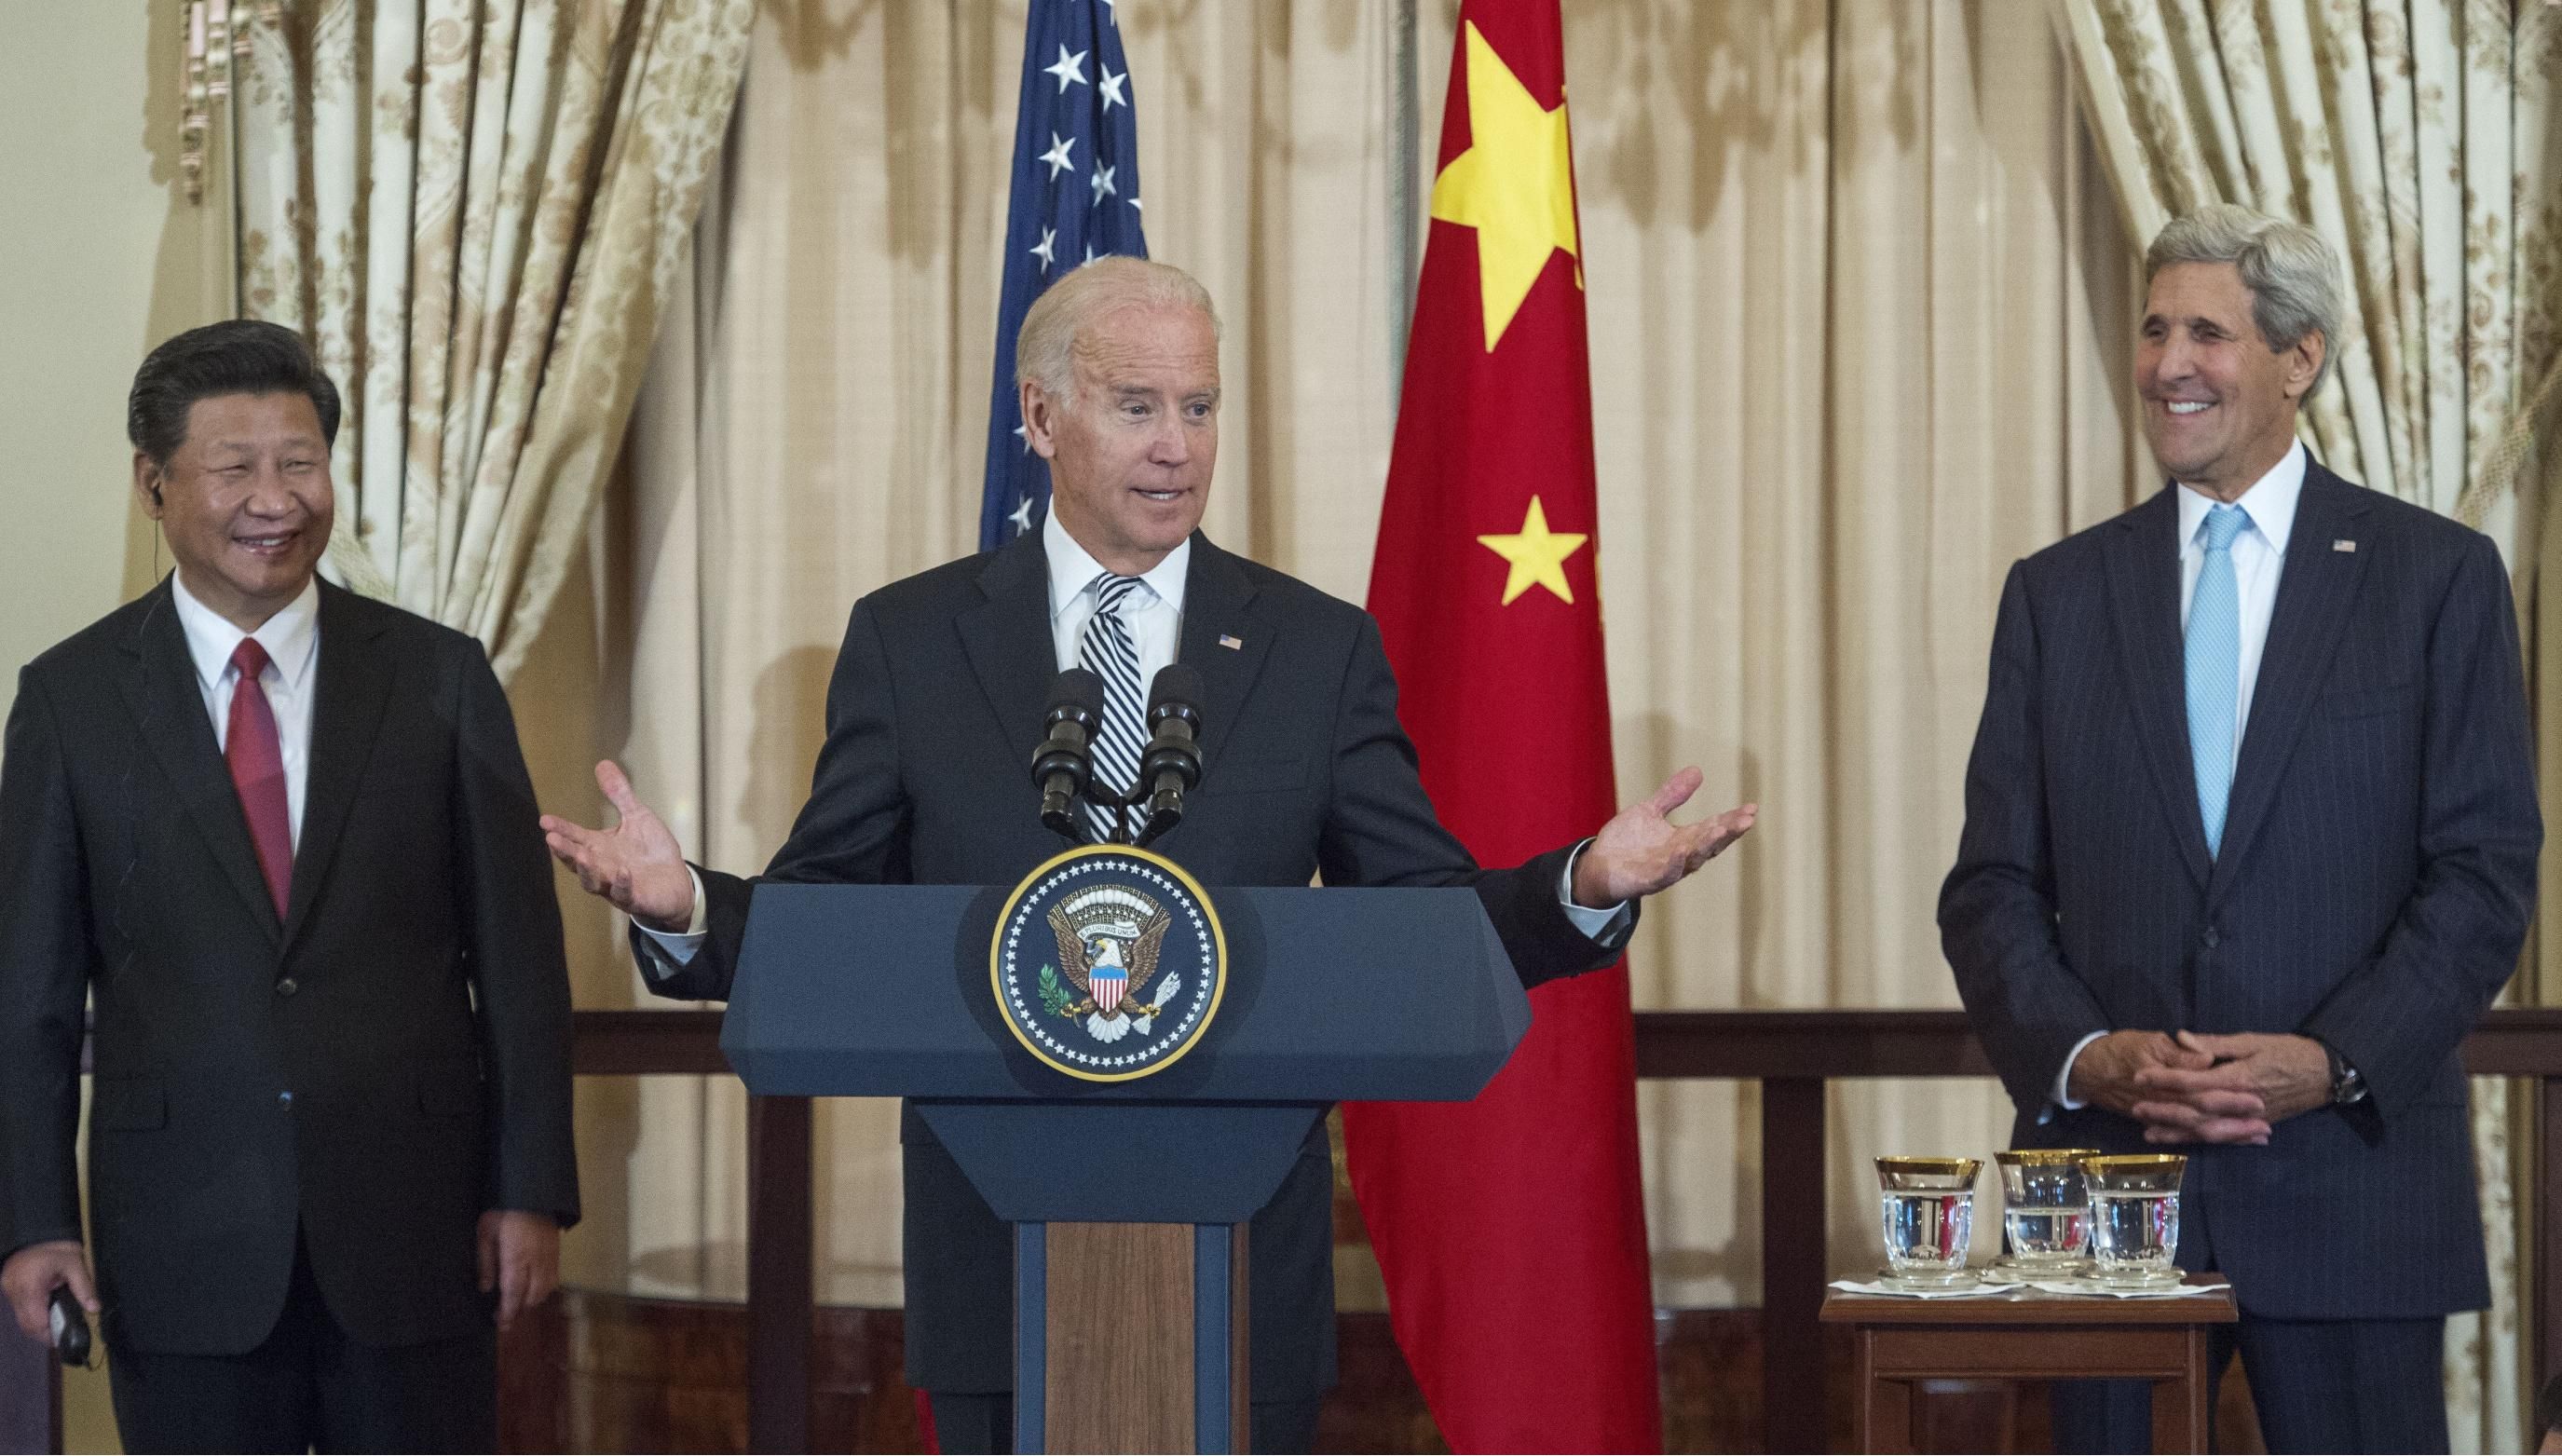 Chinese President Xi Jinping and then-U.S. Secretary of State John Kerry listen as then-U.S. Vice President Joe Biden speaks during a luncheon hosted by Kerry on September 25, 2015 in Washington, D.C. (Photo: Paul J. Richards/AFP via Getty Images)